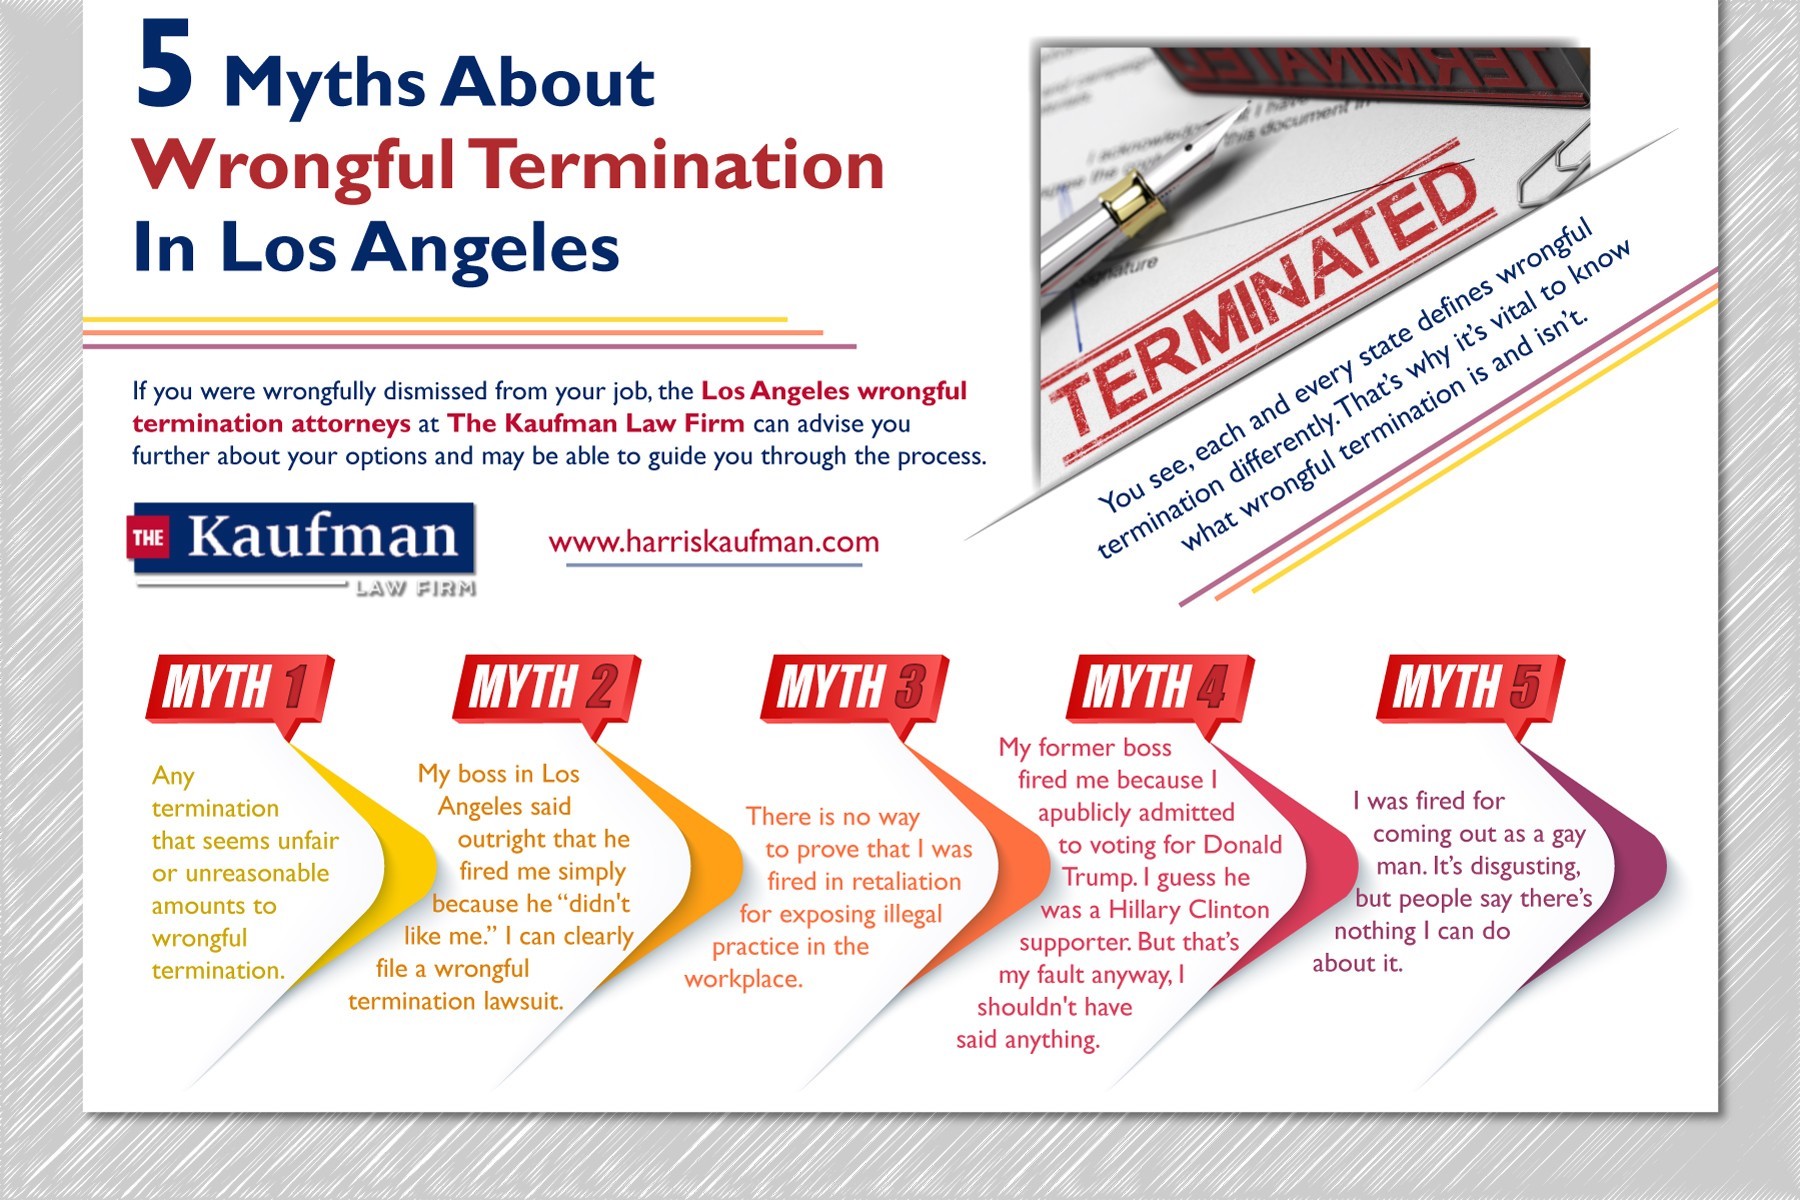 5 Myths About Wrongful Termination In Los Angeles